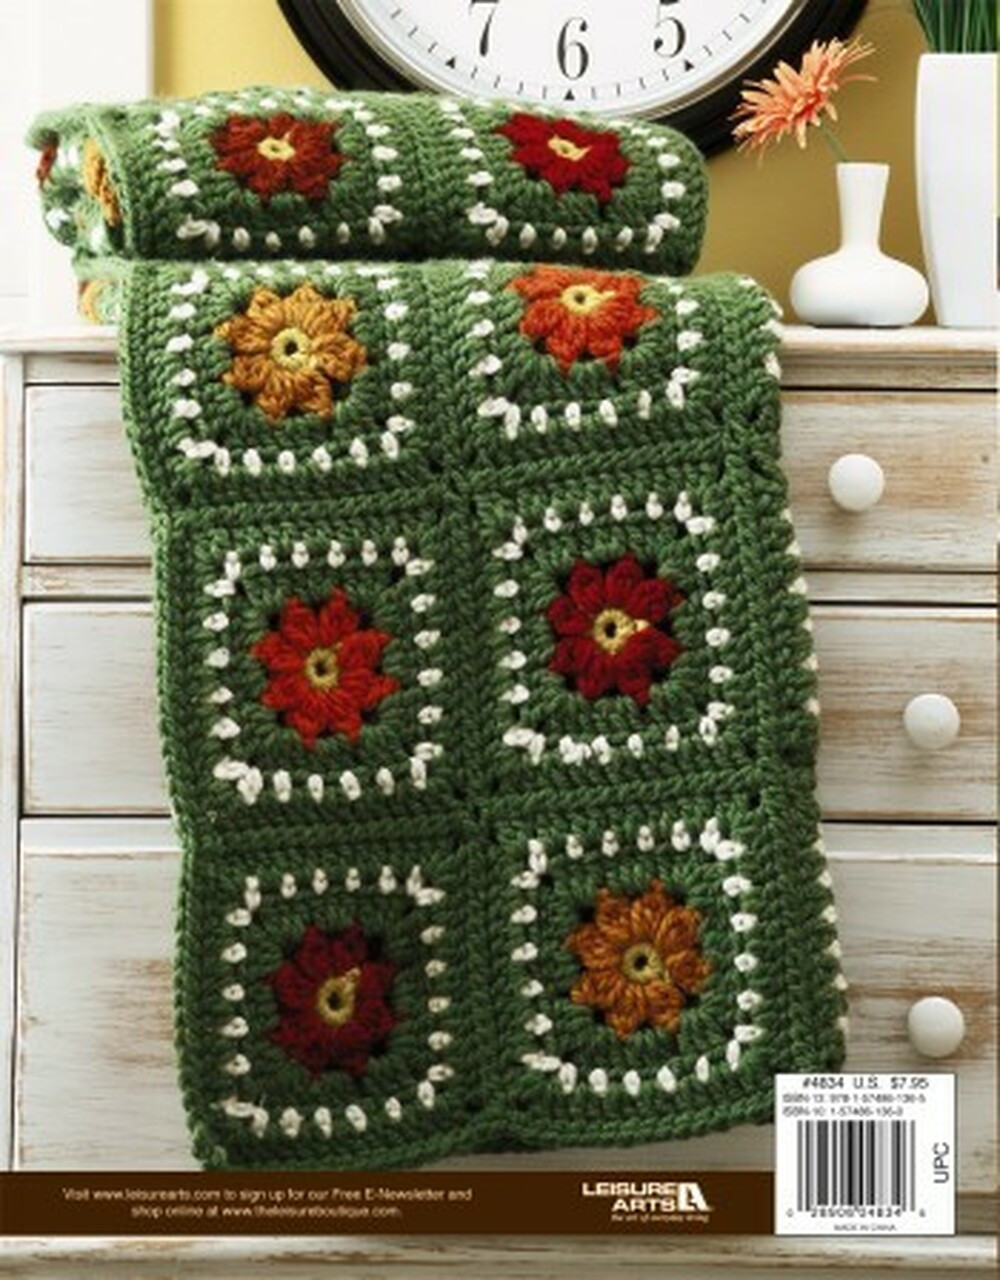 Crochet Granny Square Blanket Pattern From the Quick Comforts Book, Published by Leisure Arts